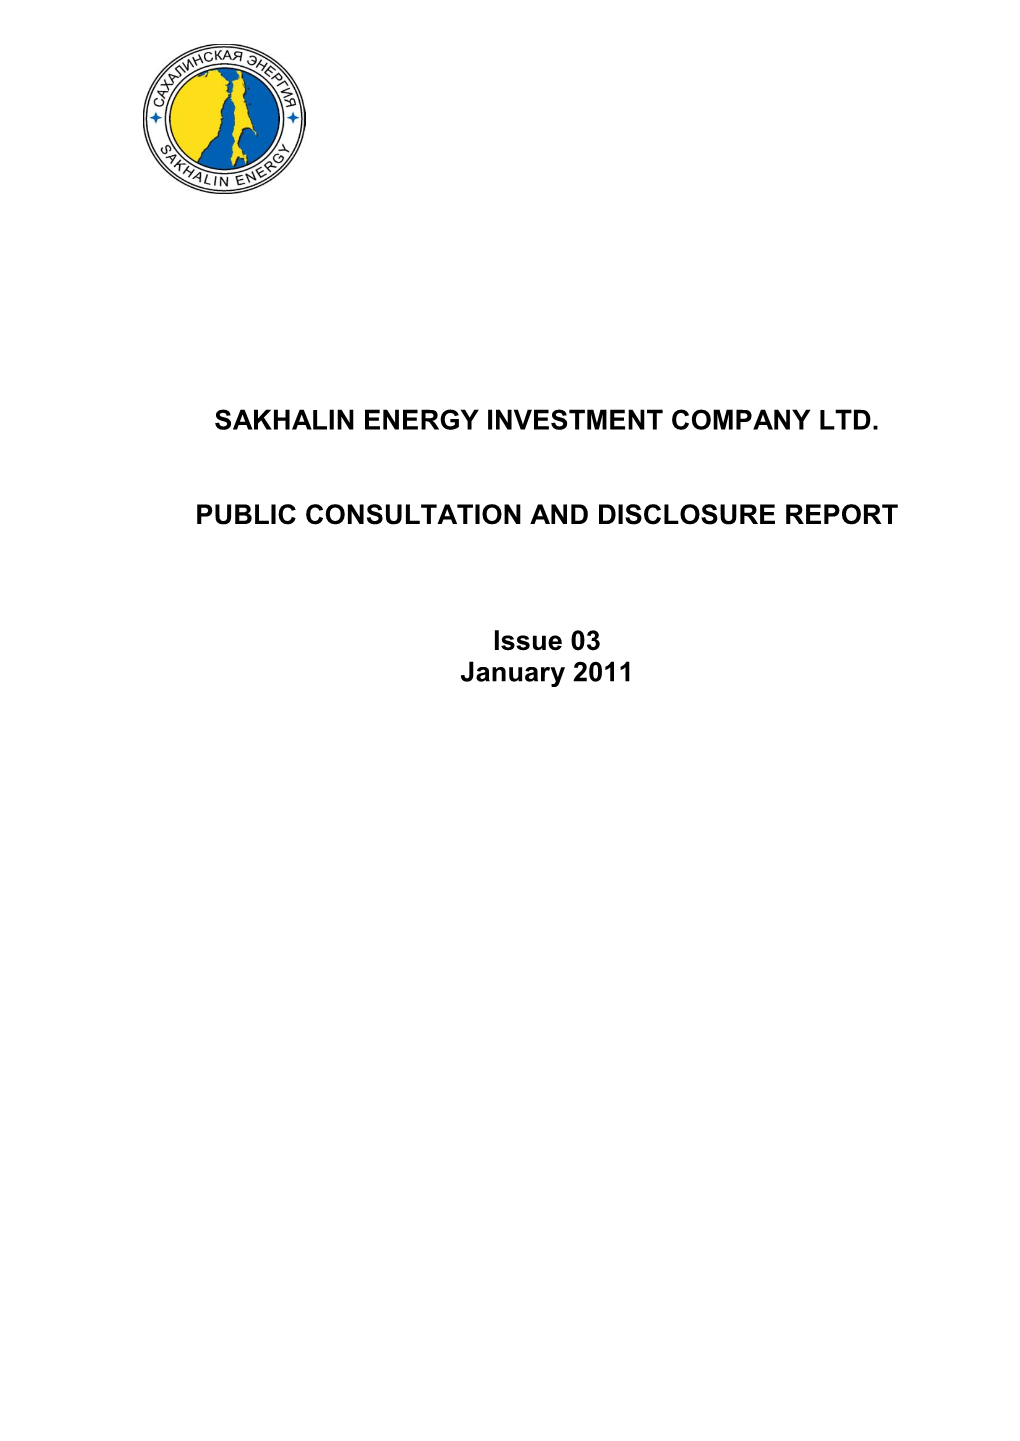 SAKHALIN ENERGY INVESTMENT COMPANY LTD. PUBLIC CONSULTATION and DISCLOSURE REPORT Issue 03 January 2011